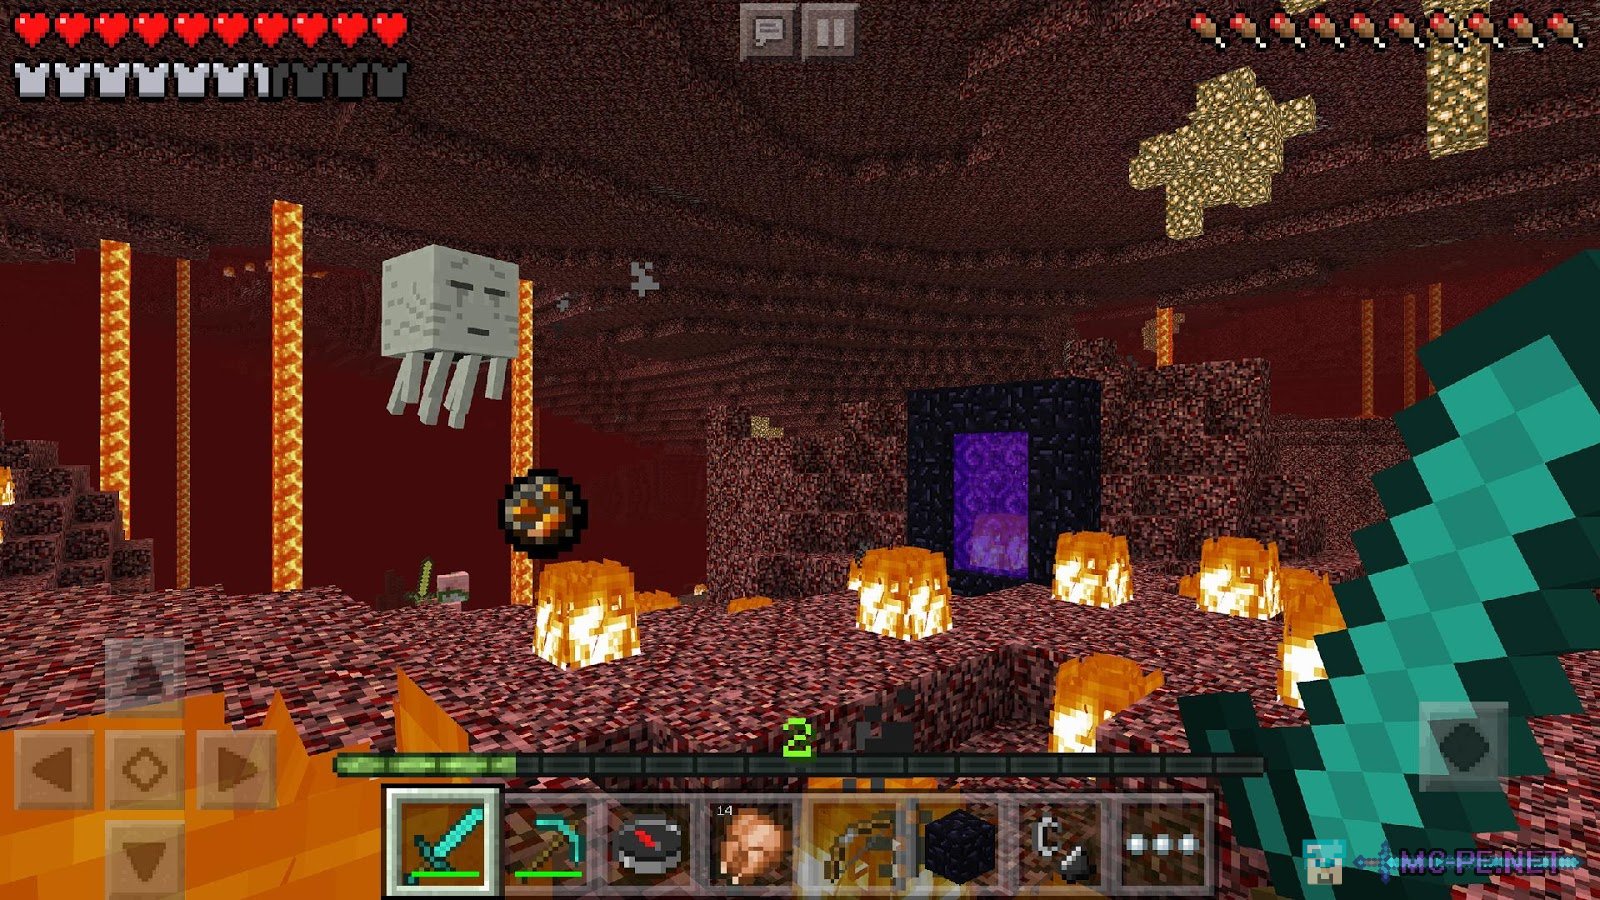 Minecraft: Pocket Edition 1.0.2.1 › Releases › MCPE - Minecraft Pocket  Edition Downloads